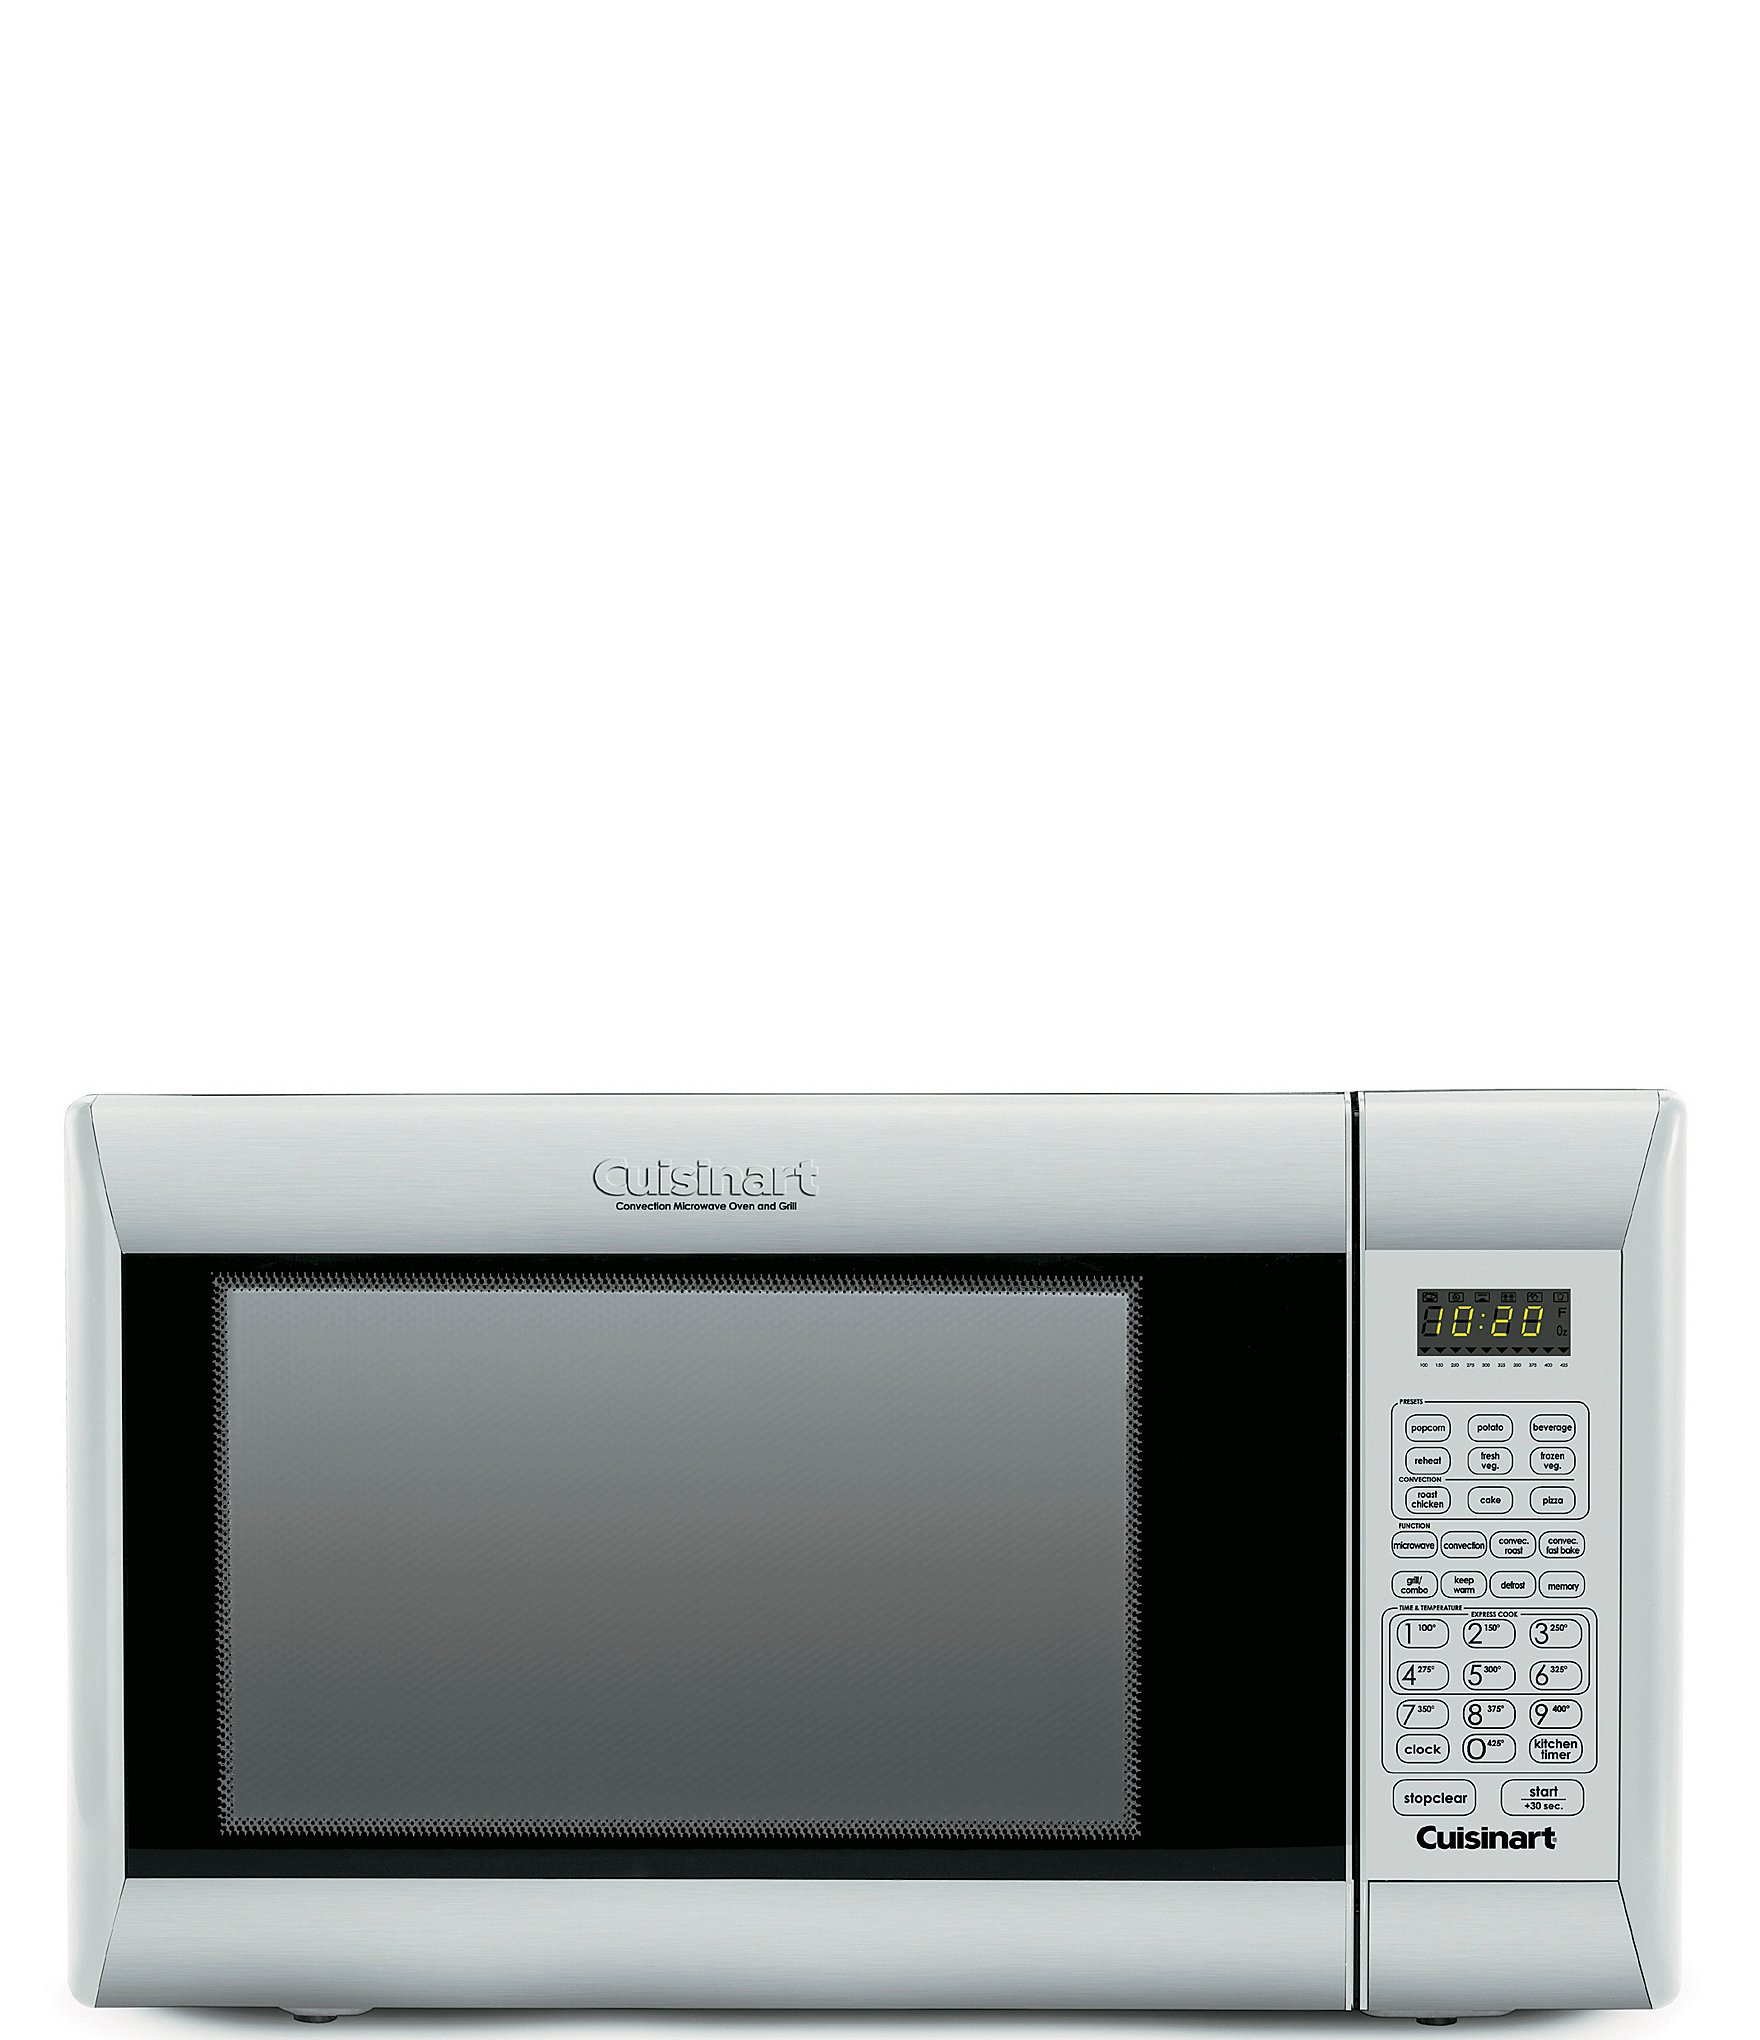 Cuisinart Microwave Oven CMW-100 Review